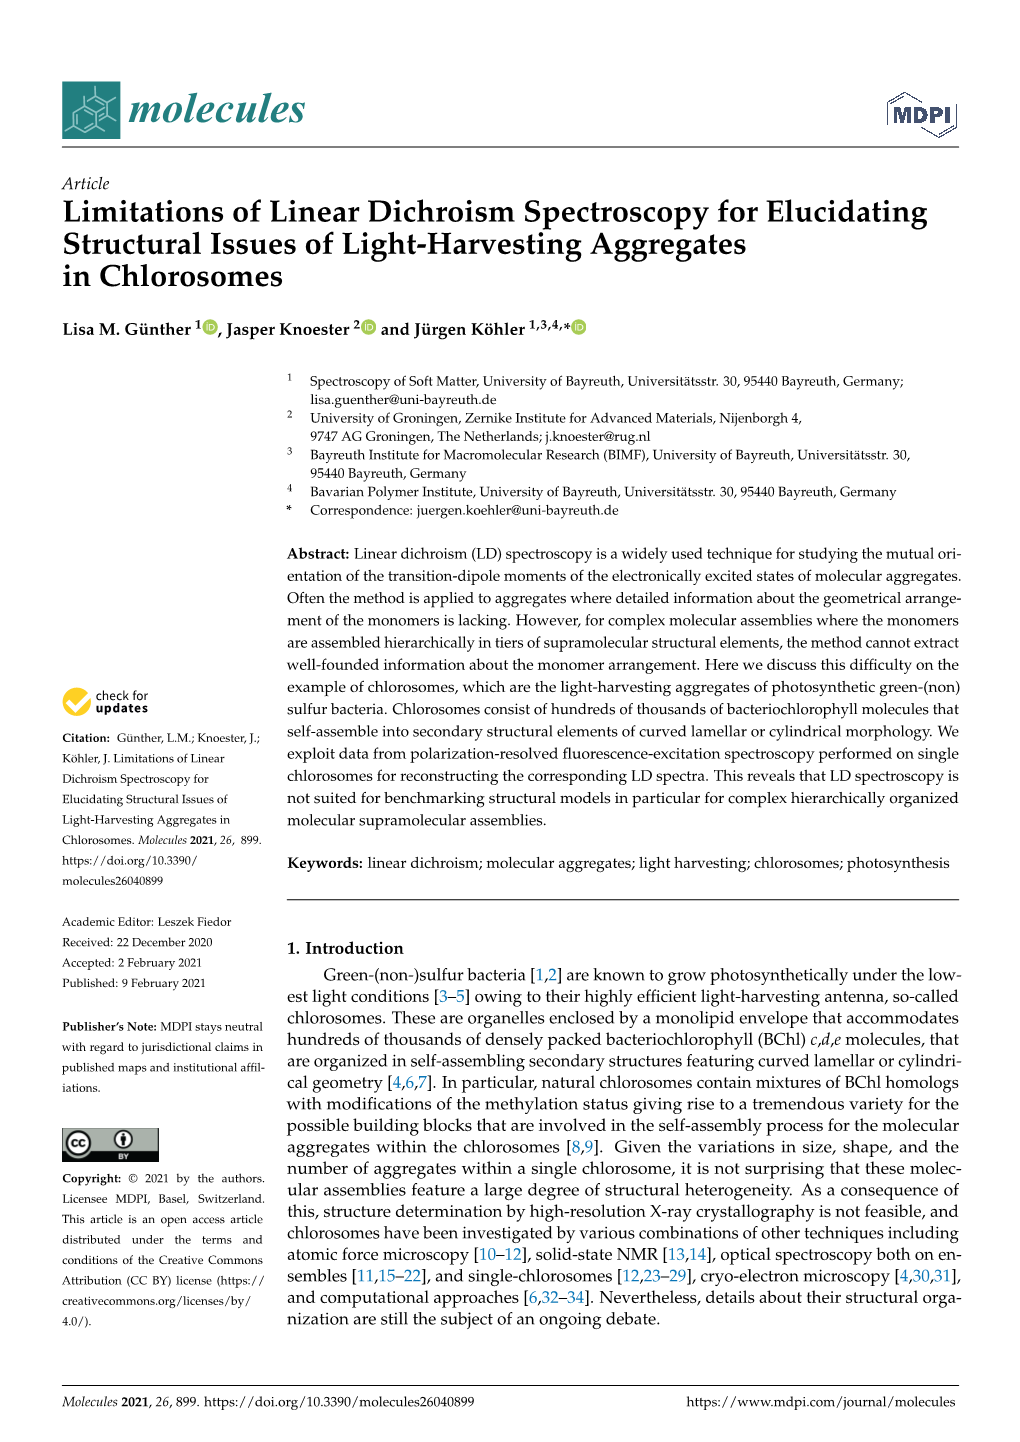 Limitations of Linear Dichroism Spectroscopy for Elucidating Structural Issues of Light-Harvesting Aggregates in Chlorosomes